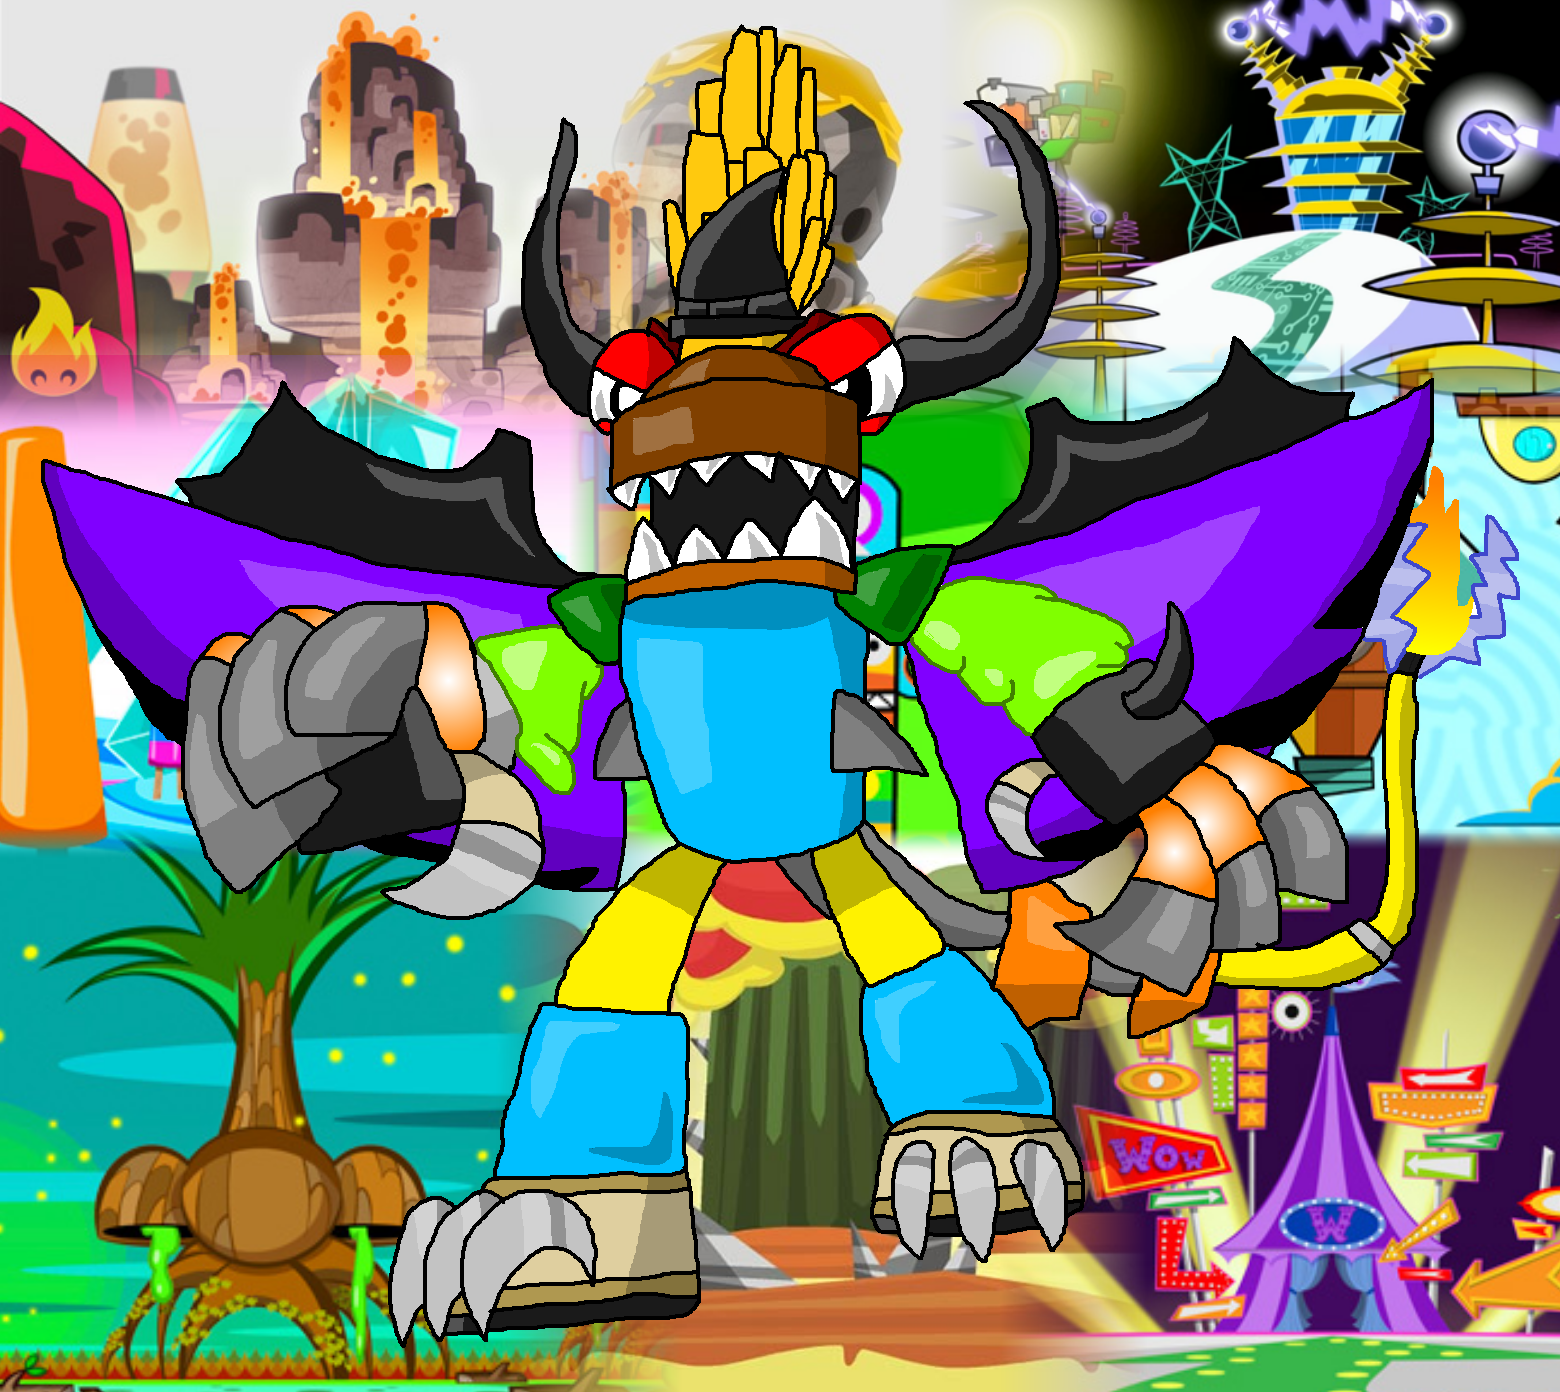 Mixels: Series 1, 2, and 3 Max Combined by DarkTidalWave on